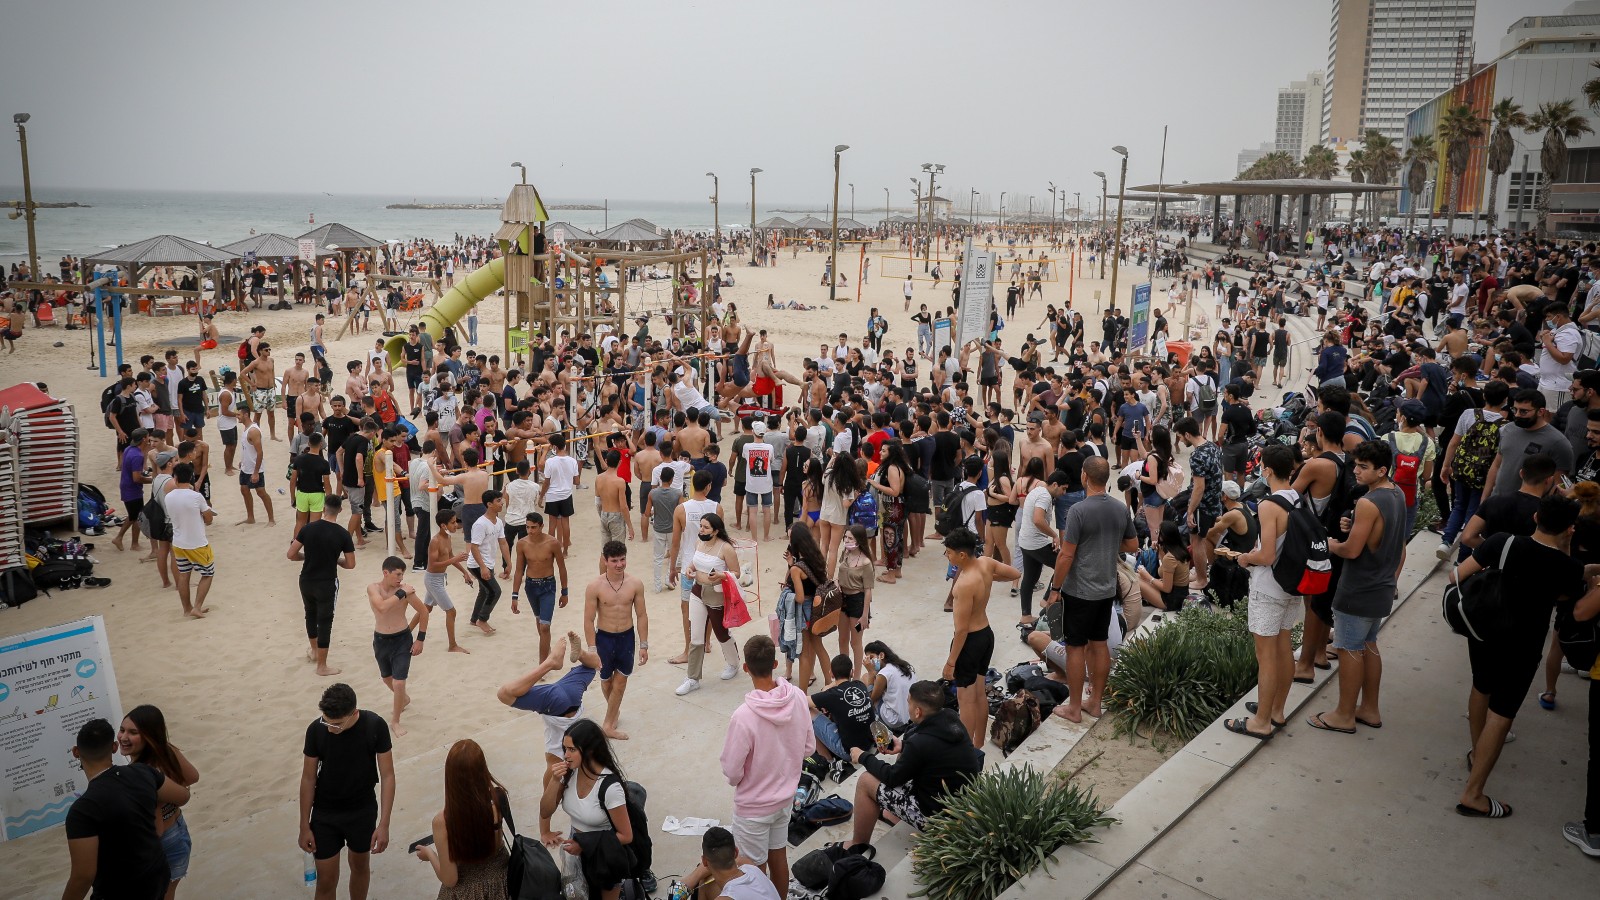 Israelis are returning to public places – like this beach in Tel Aviv -- after more than half the population is vaccinated. Photo by Noam Revkin Fenton/Flash90